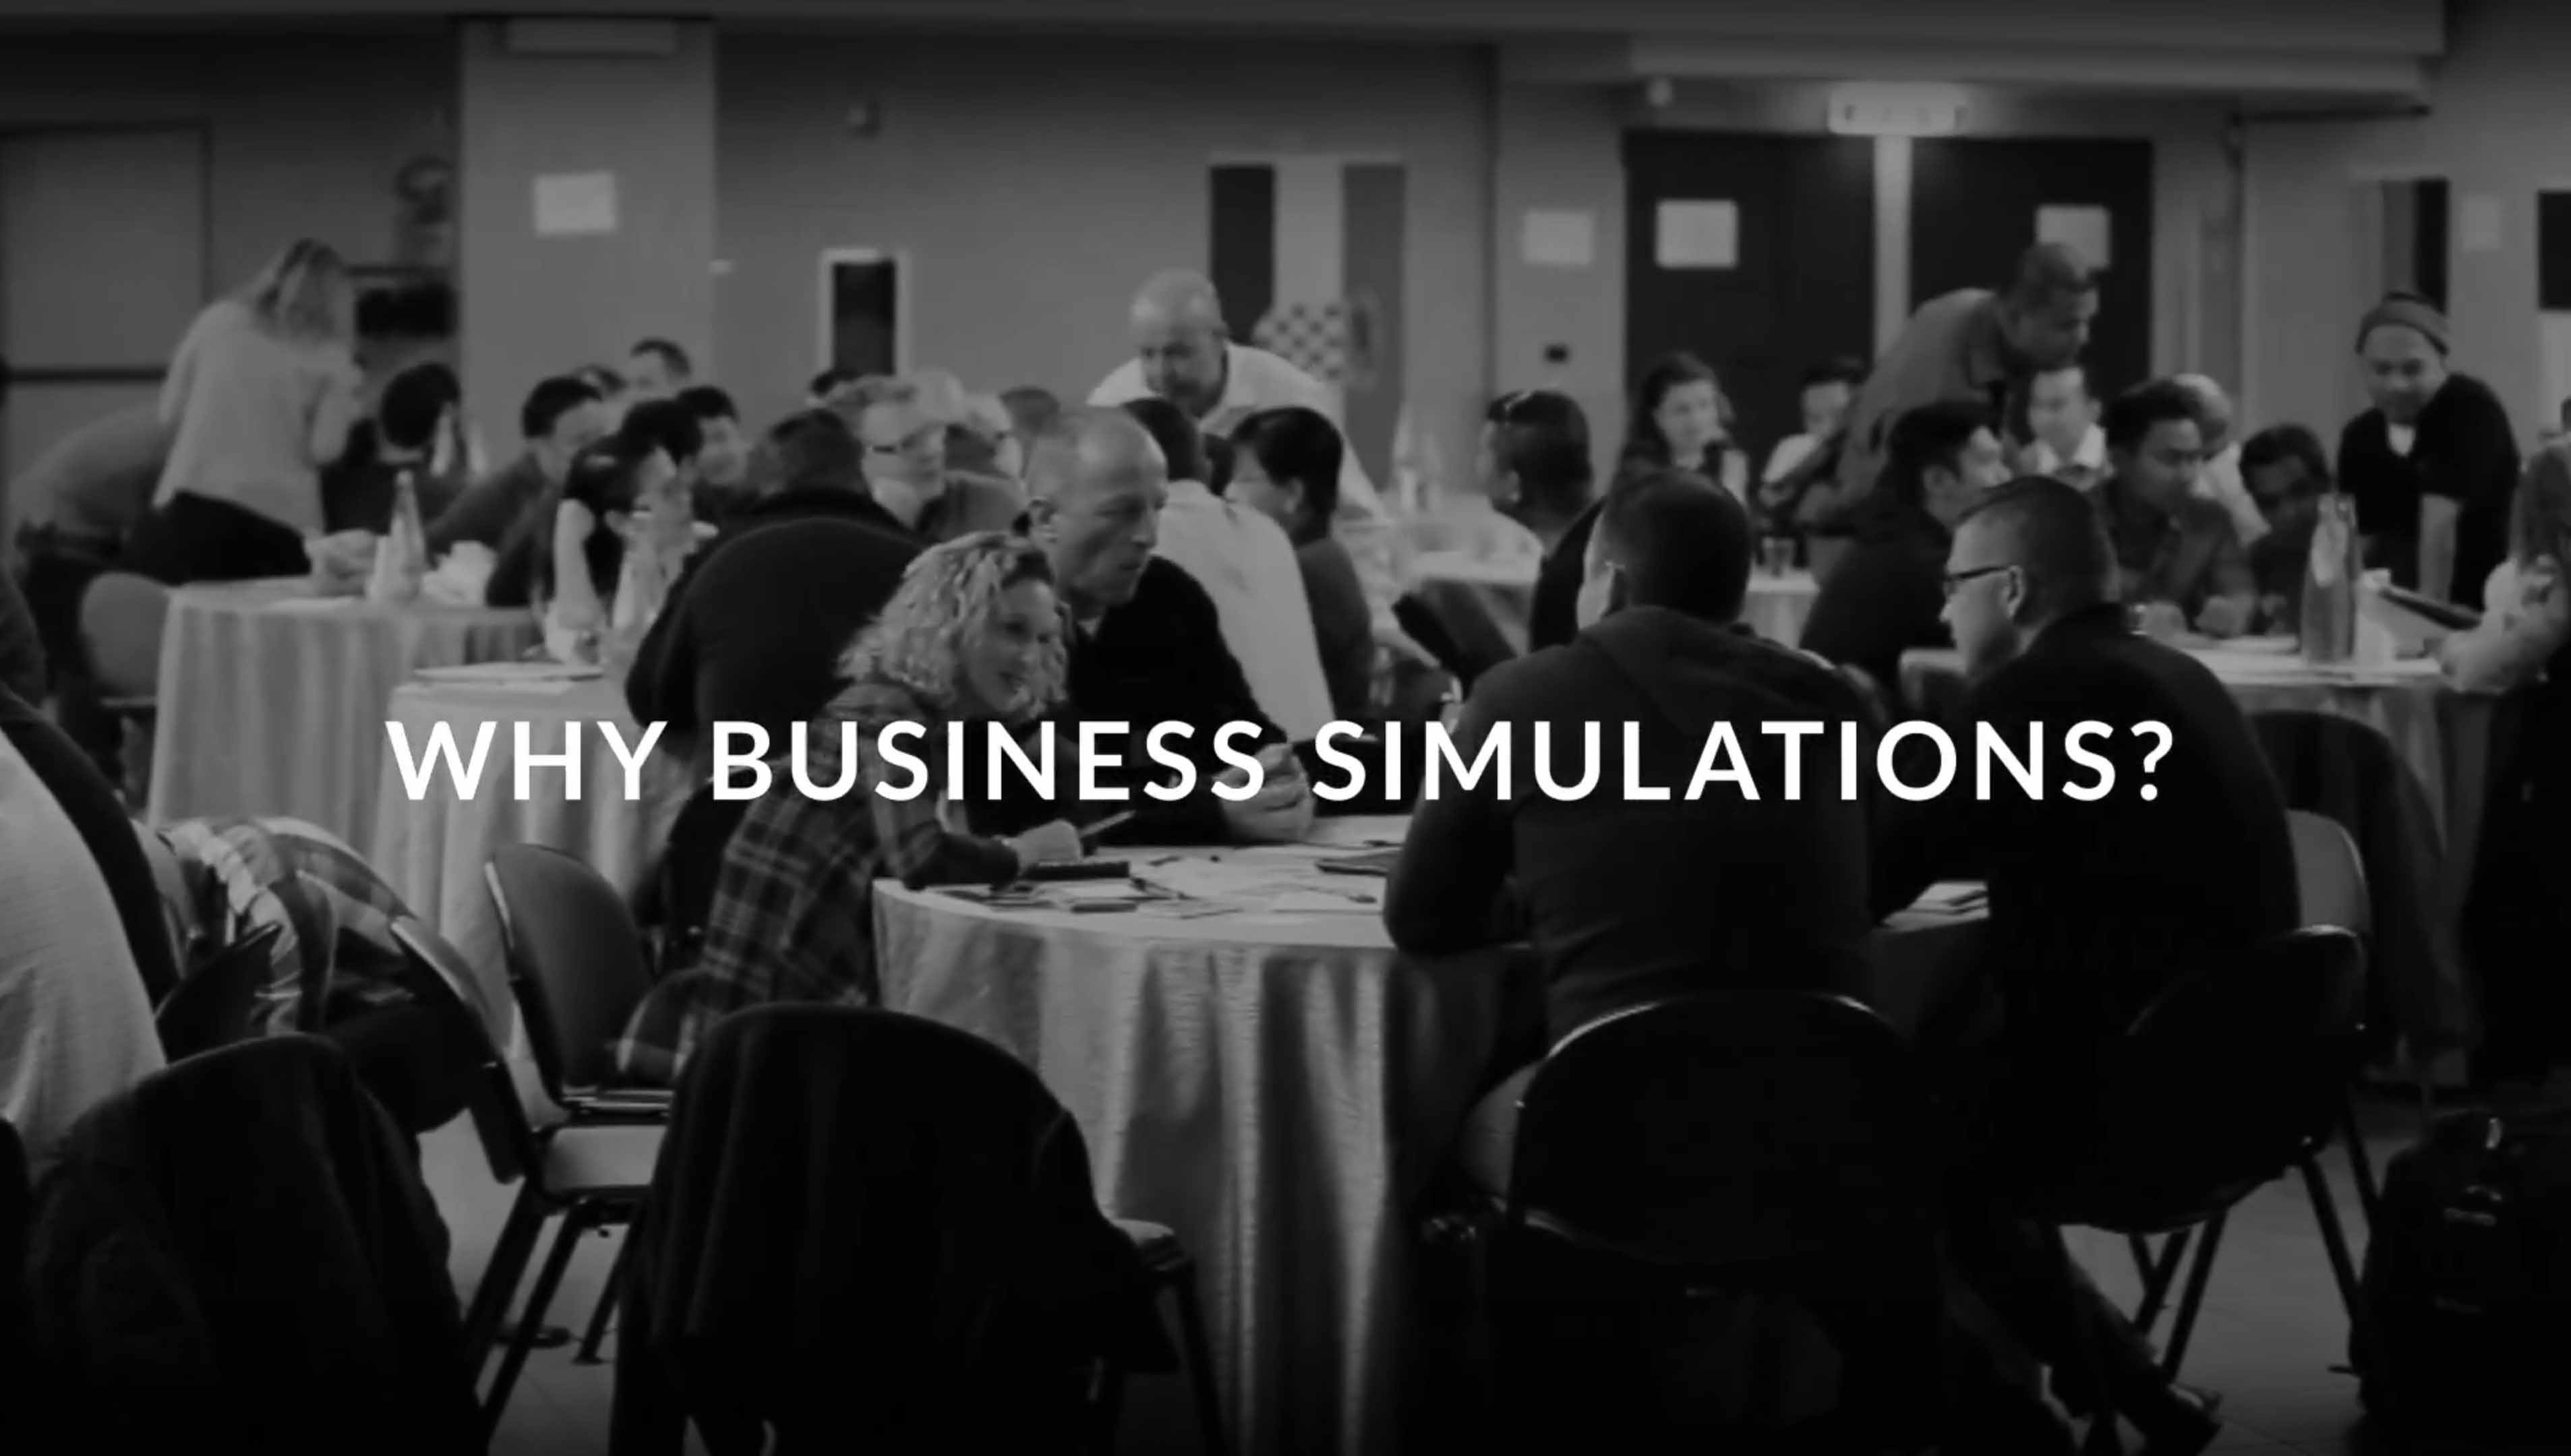 Why business simulations?